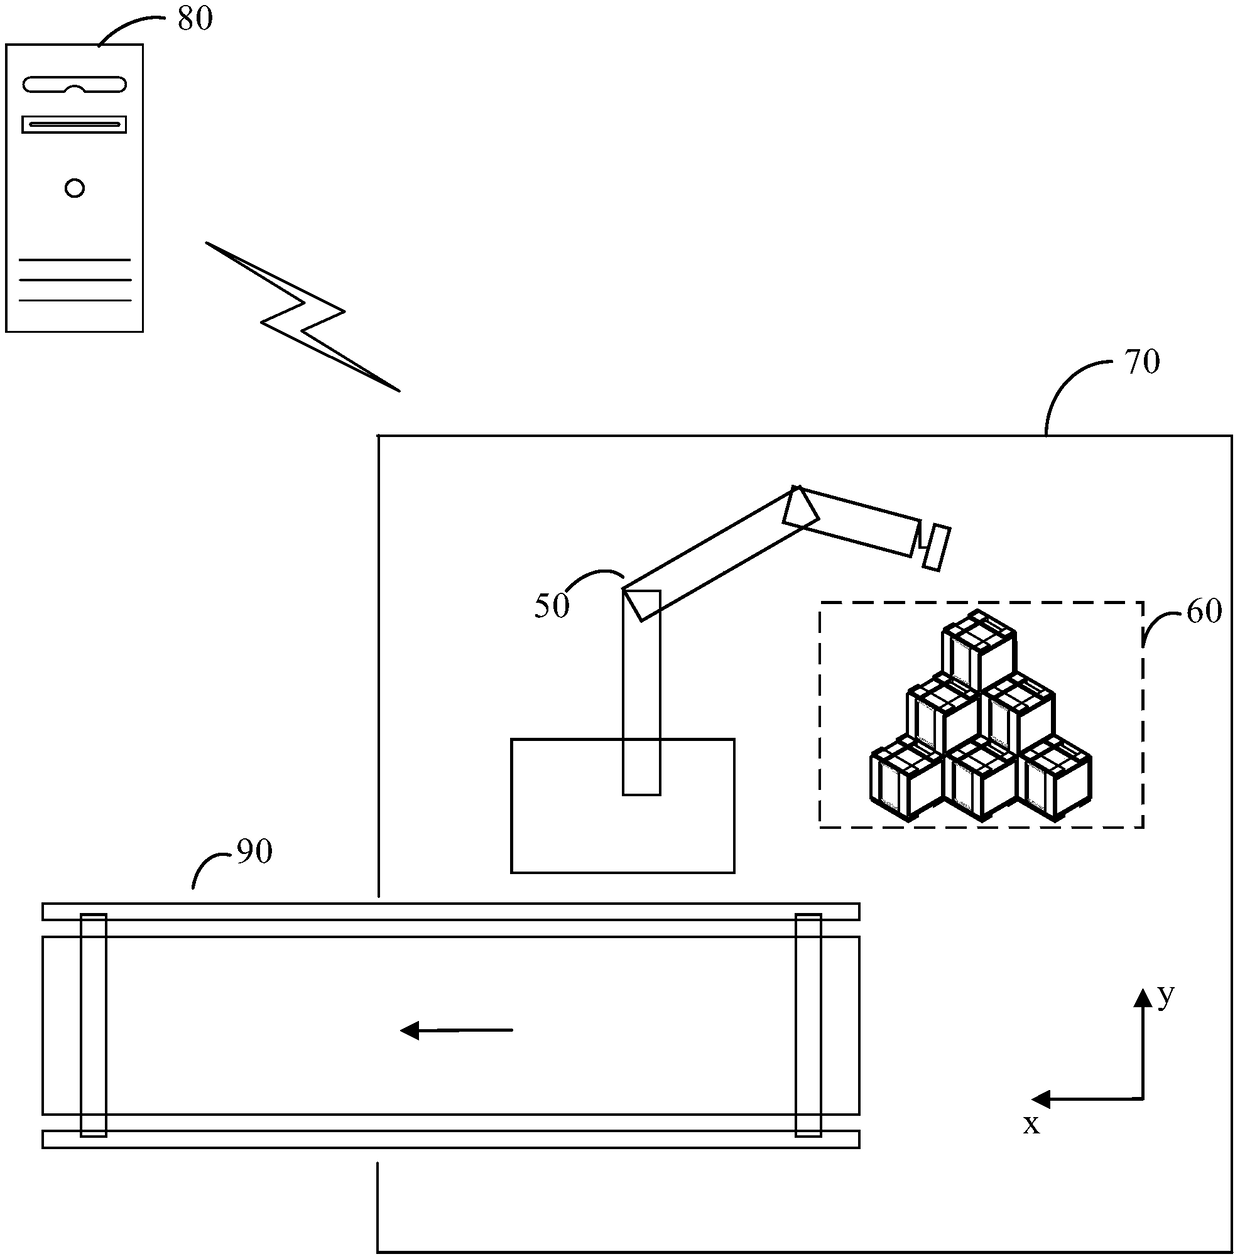 In hold cargo protection system, method and robot device